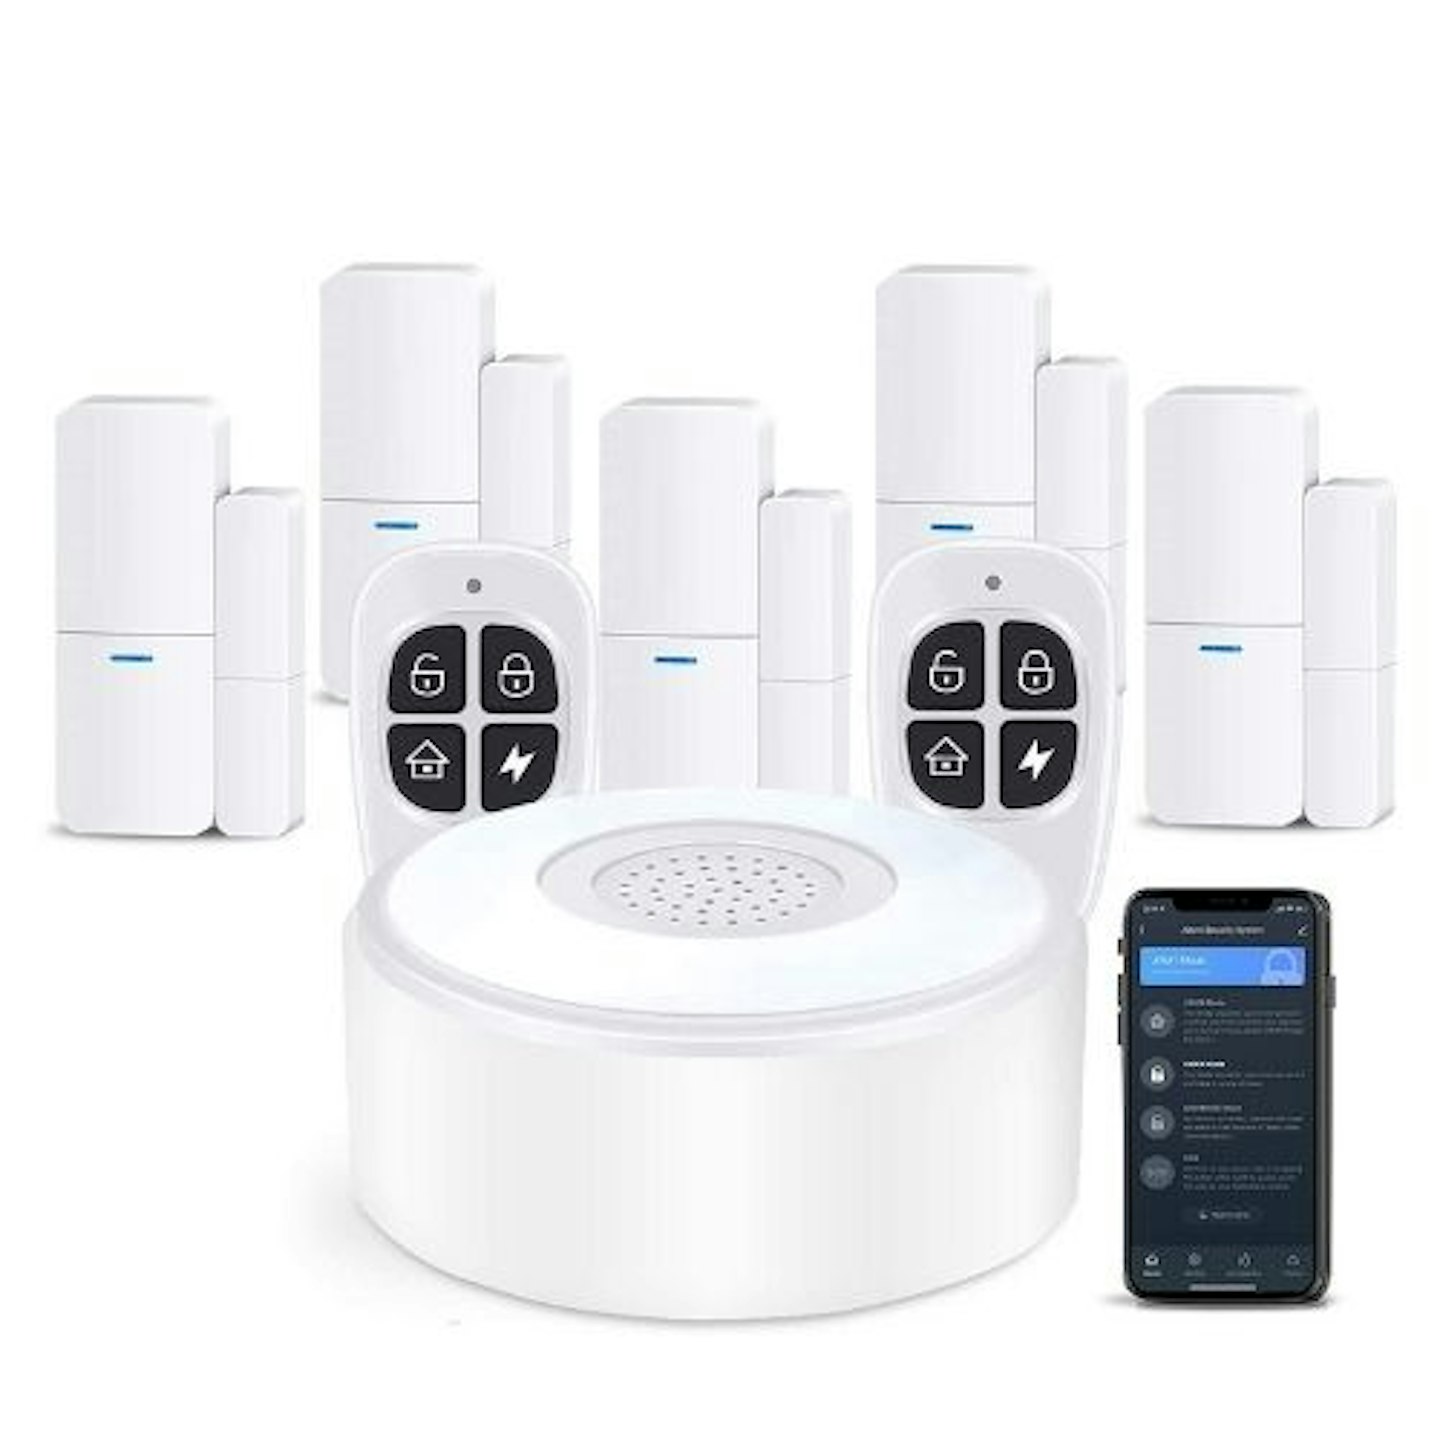 AGSHome Wireless Smart Home Alarm Security System